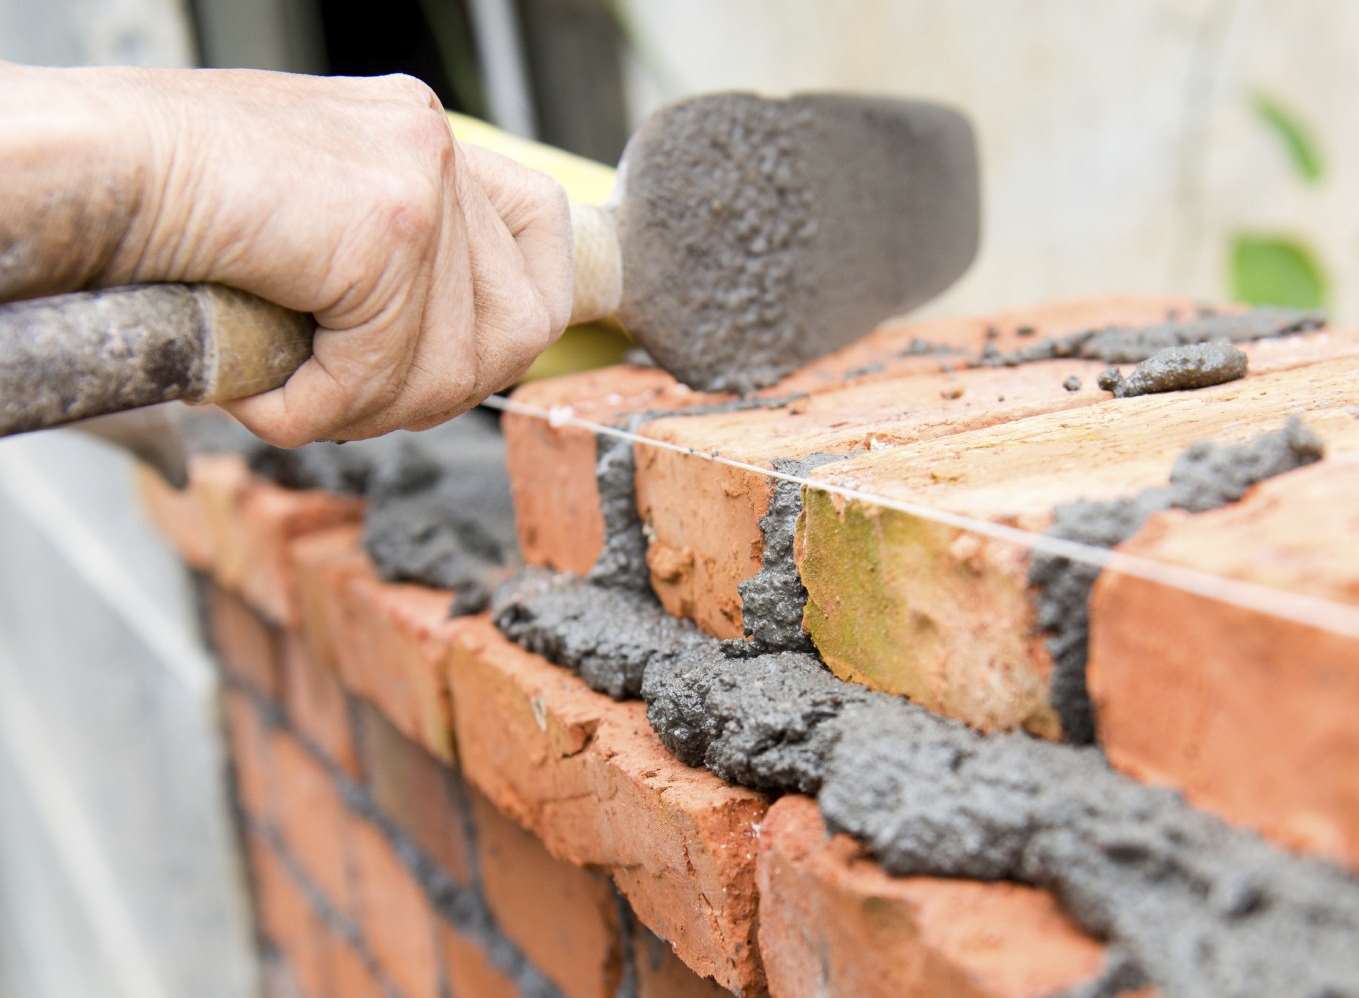 Building bricks and mortar for future council housing needs